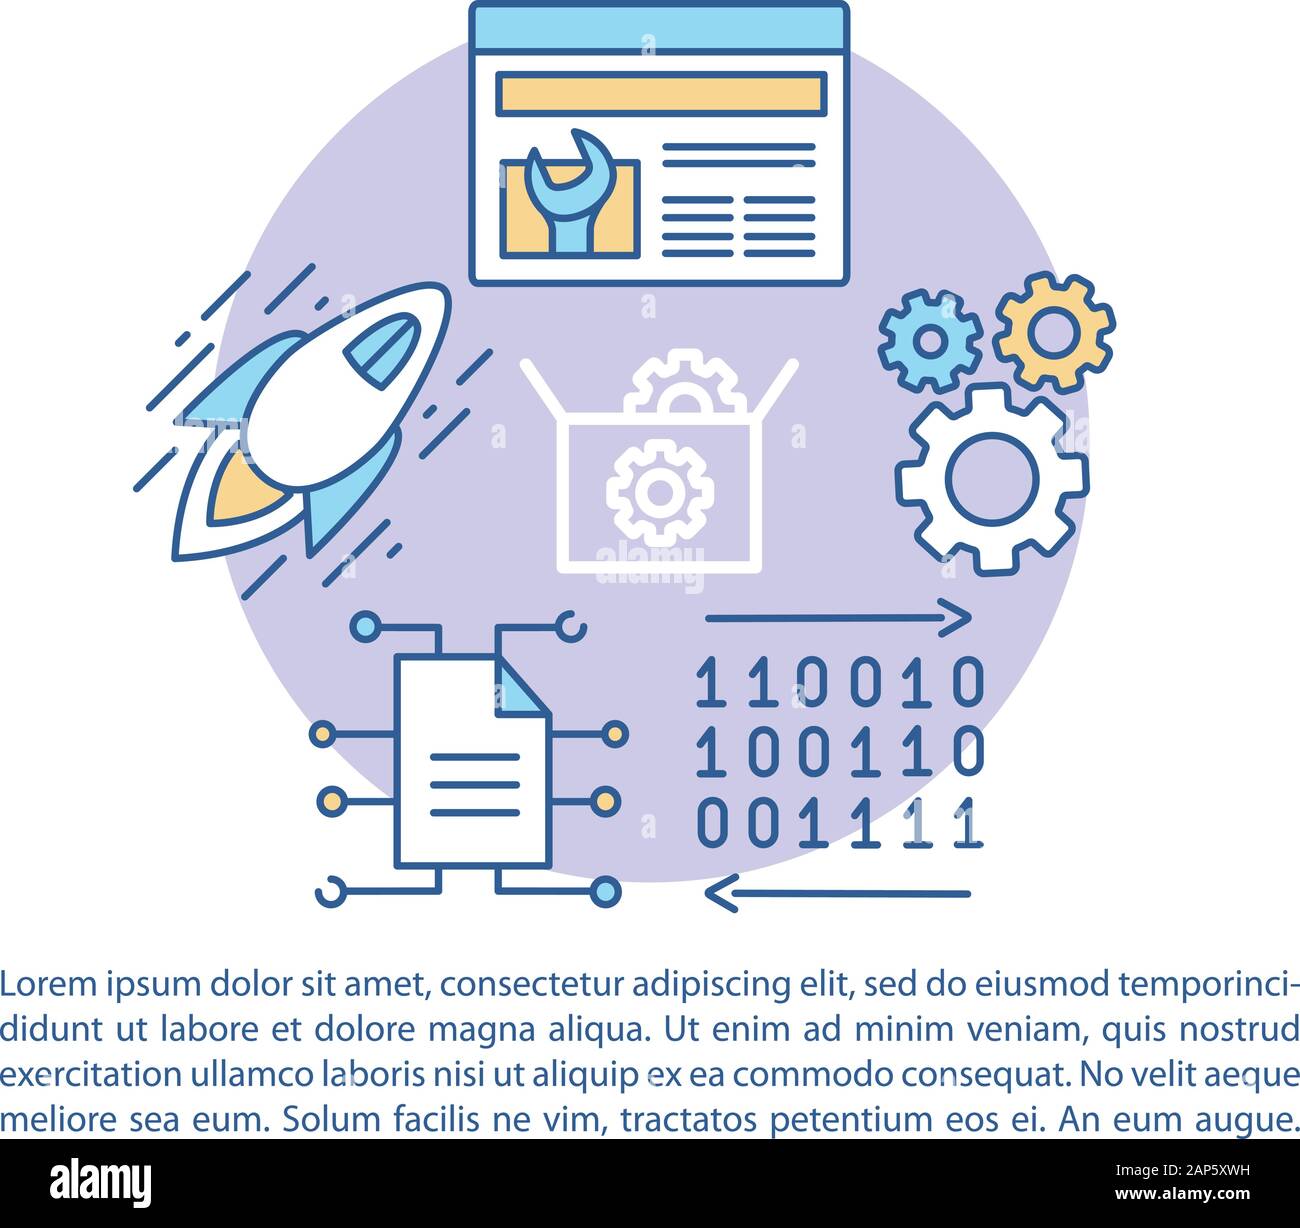 Web development article page vector template. Binary system. Software programming. Brochure, magazine, booklet design element, linear icons, text boxe Stock Vector